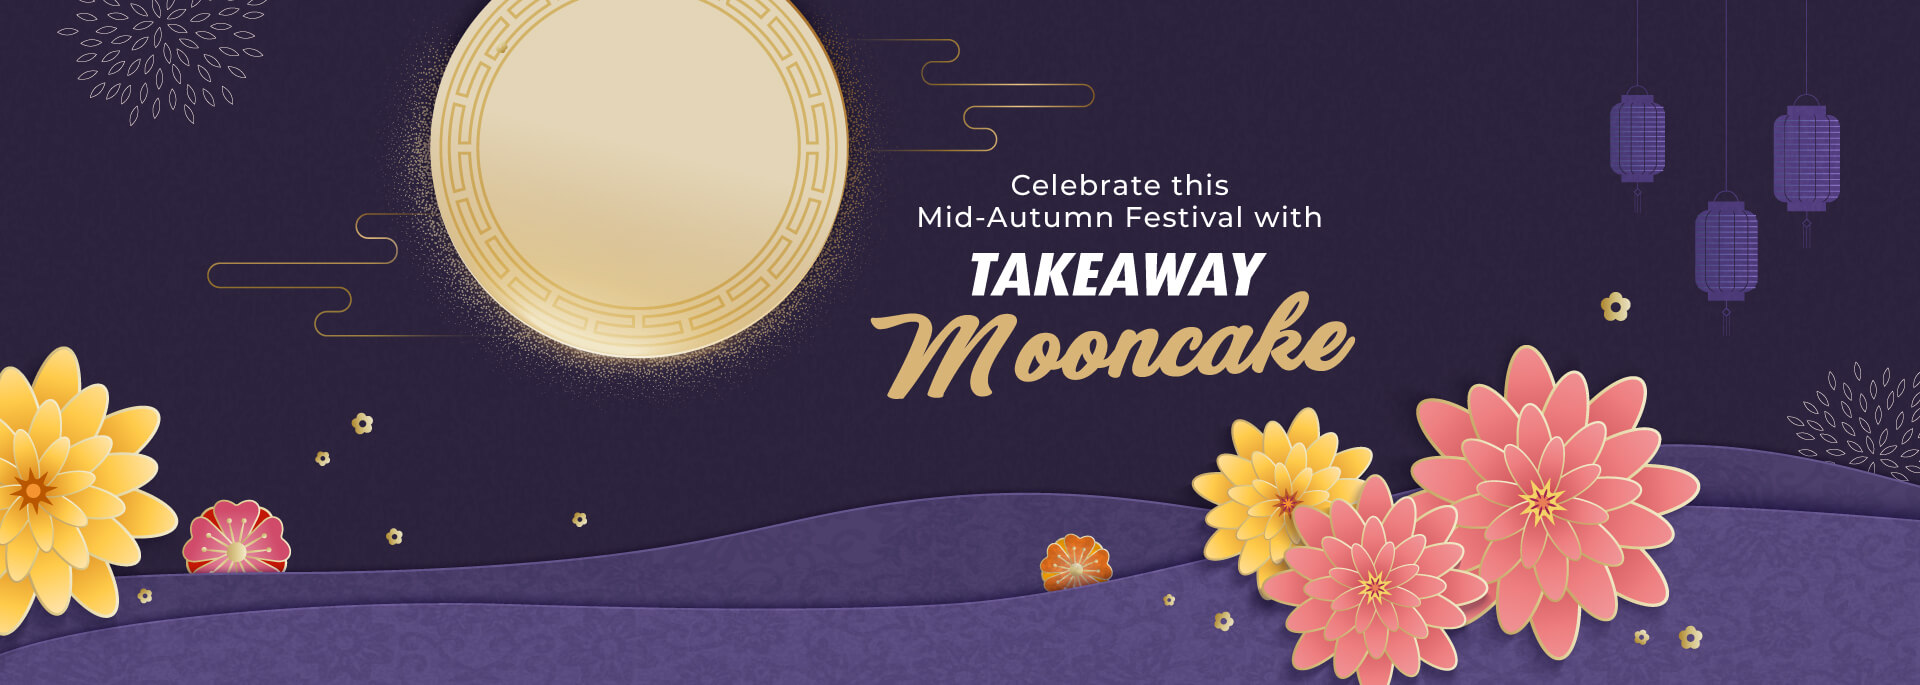 Celebrate this Mid-Autumn Festival with Takeaway Mooncake